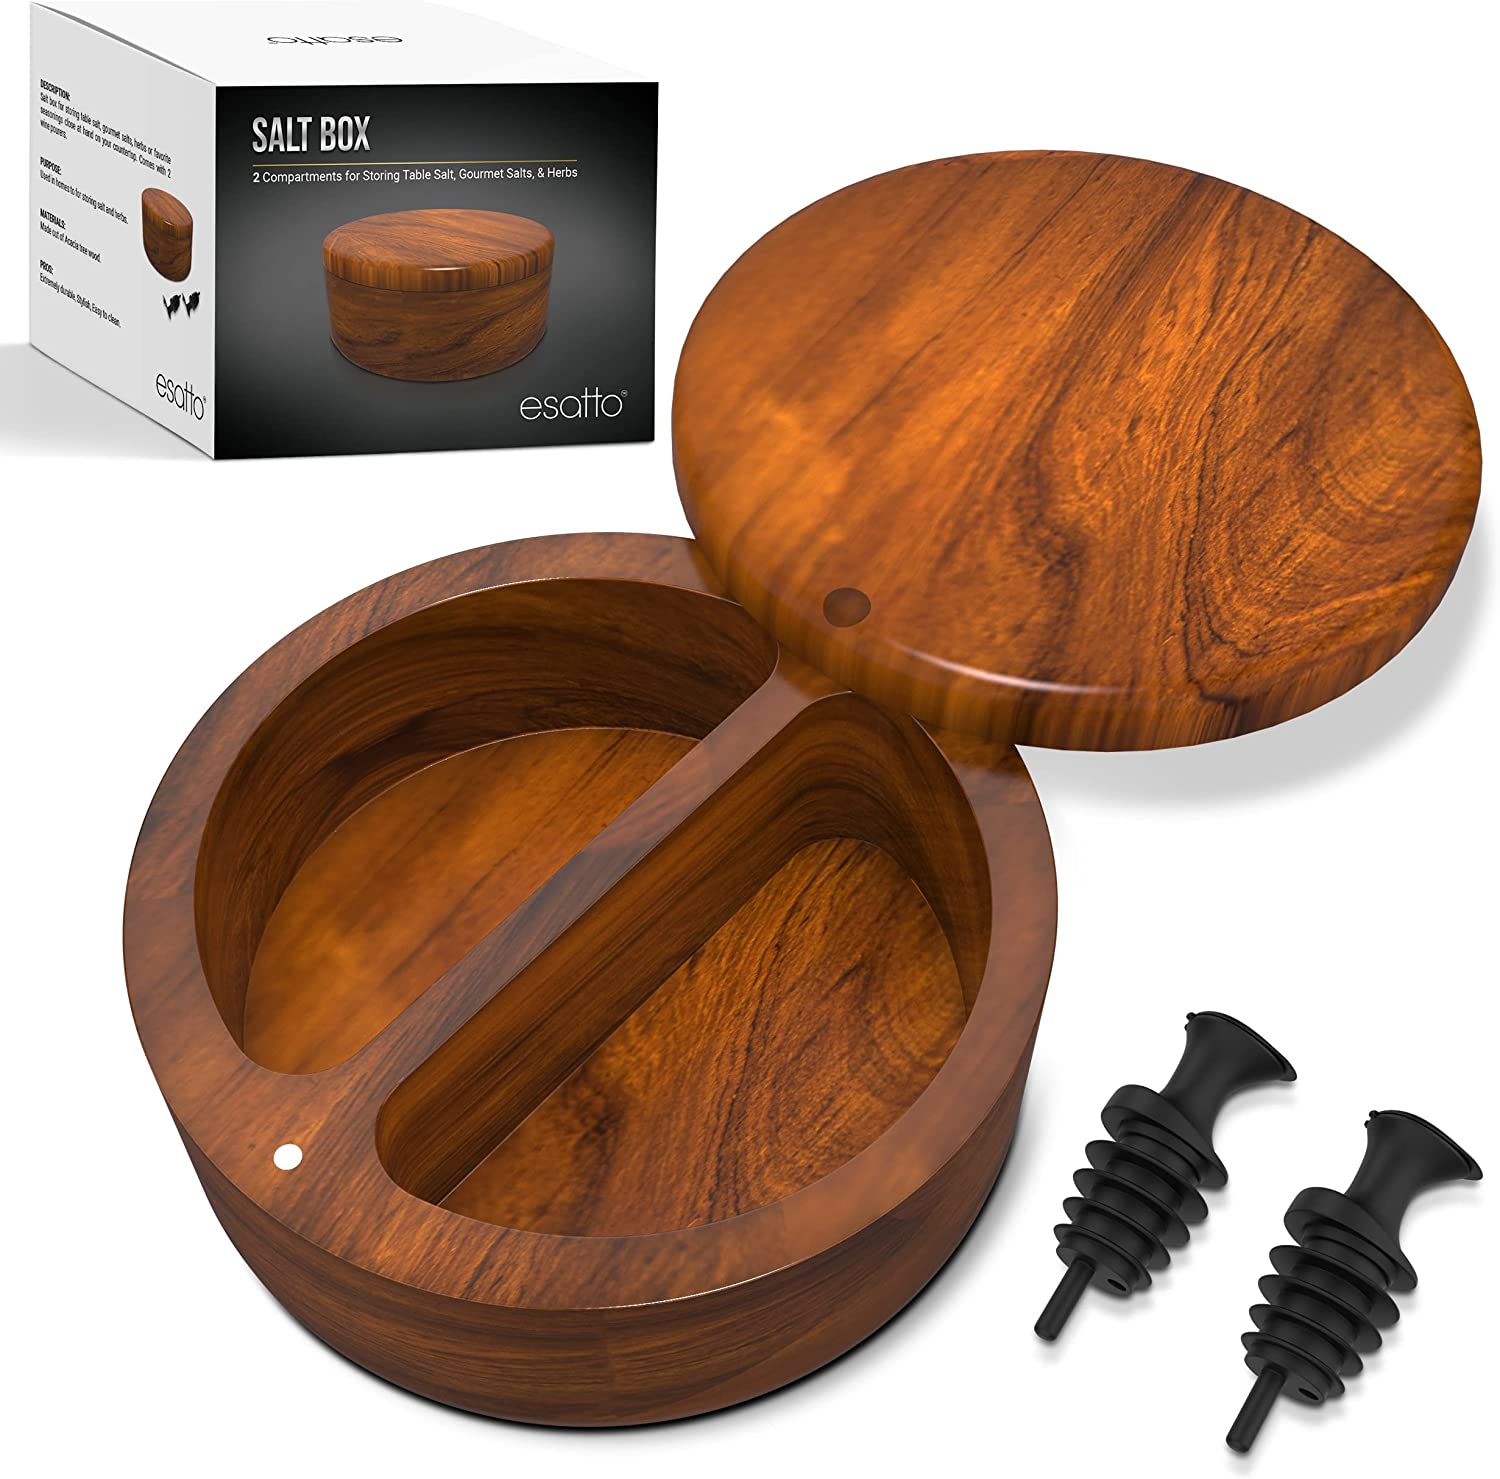 Featured image for “Esatto Round Acacia Wooden Salt and Spice Box, Magnetic Swivel Lid, Salt pepper or Spice Storage Box, two compartments, 2 Wine Pourers Included”